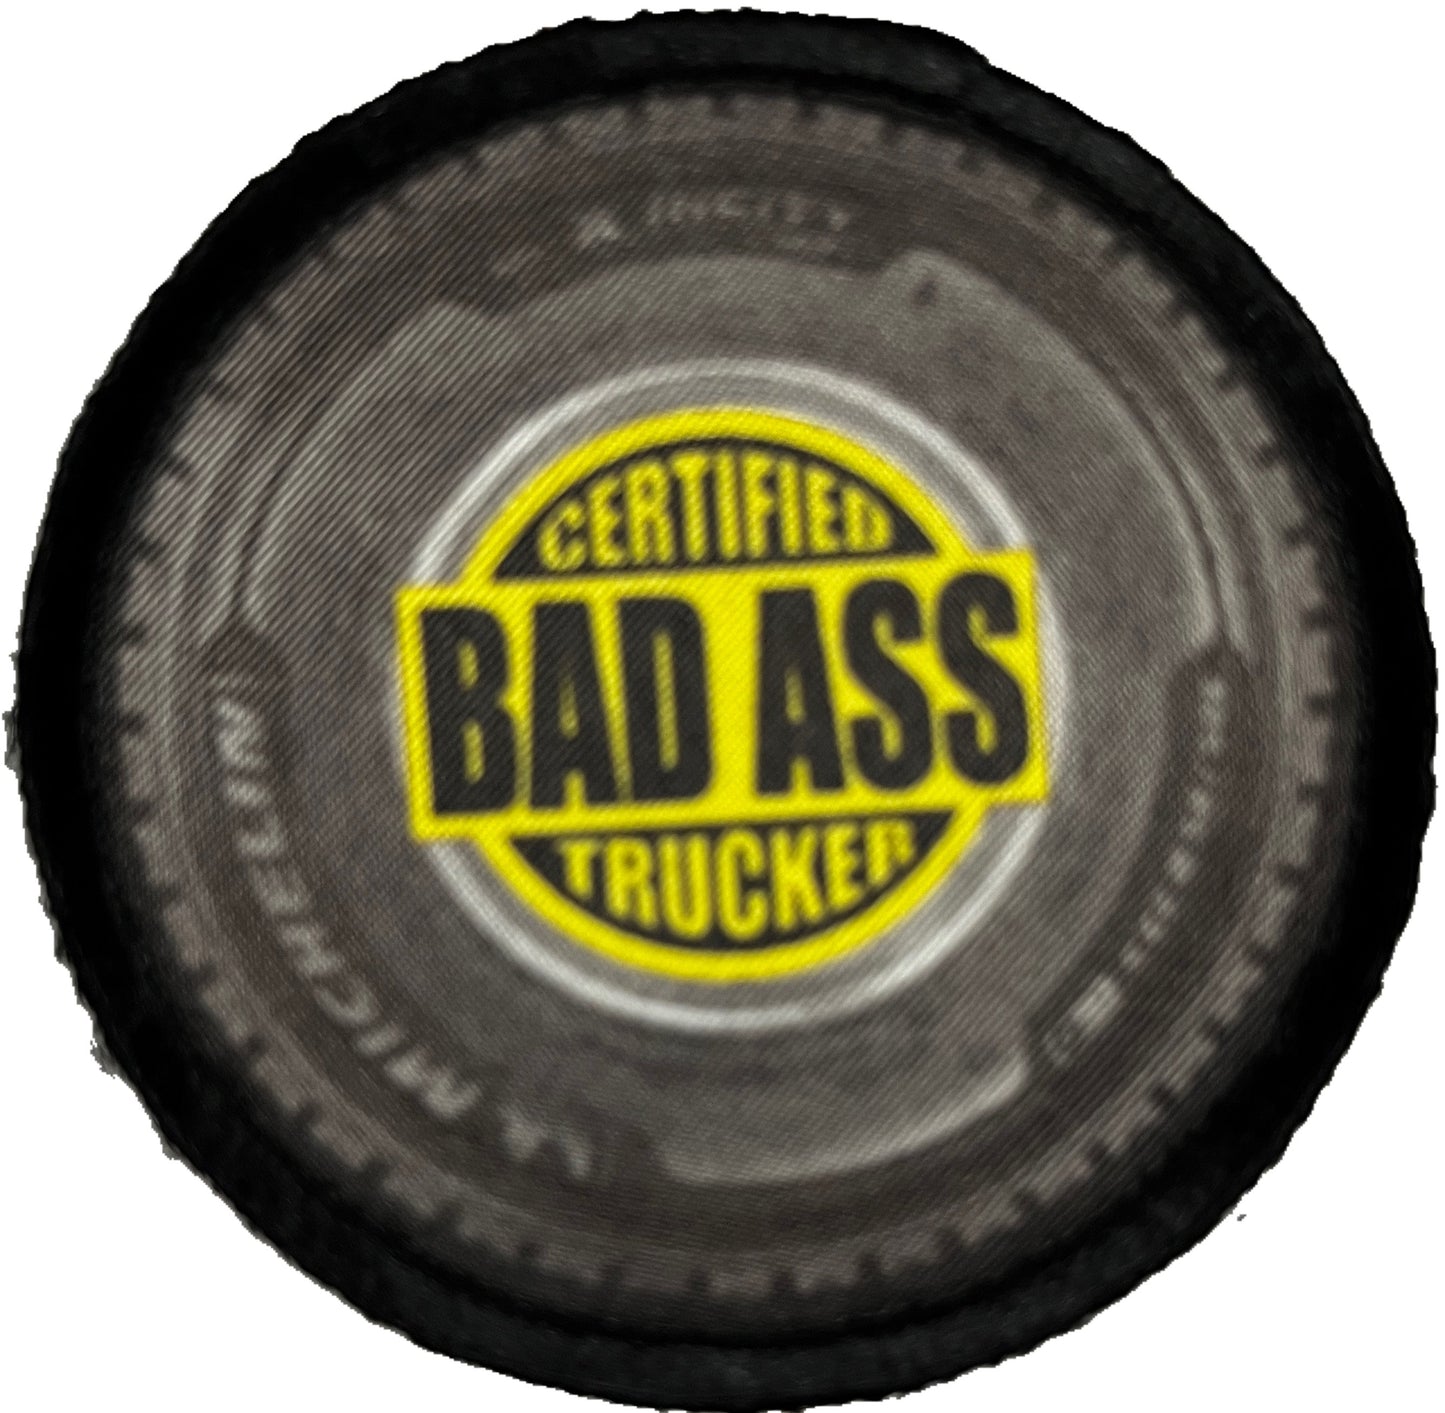 3" Certified Badass Trucker Morale Patch Morale Patches Redheaded T Shirts 